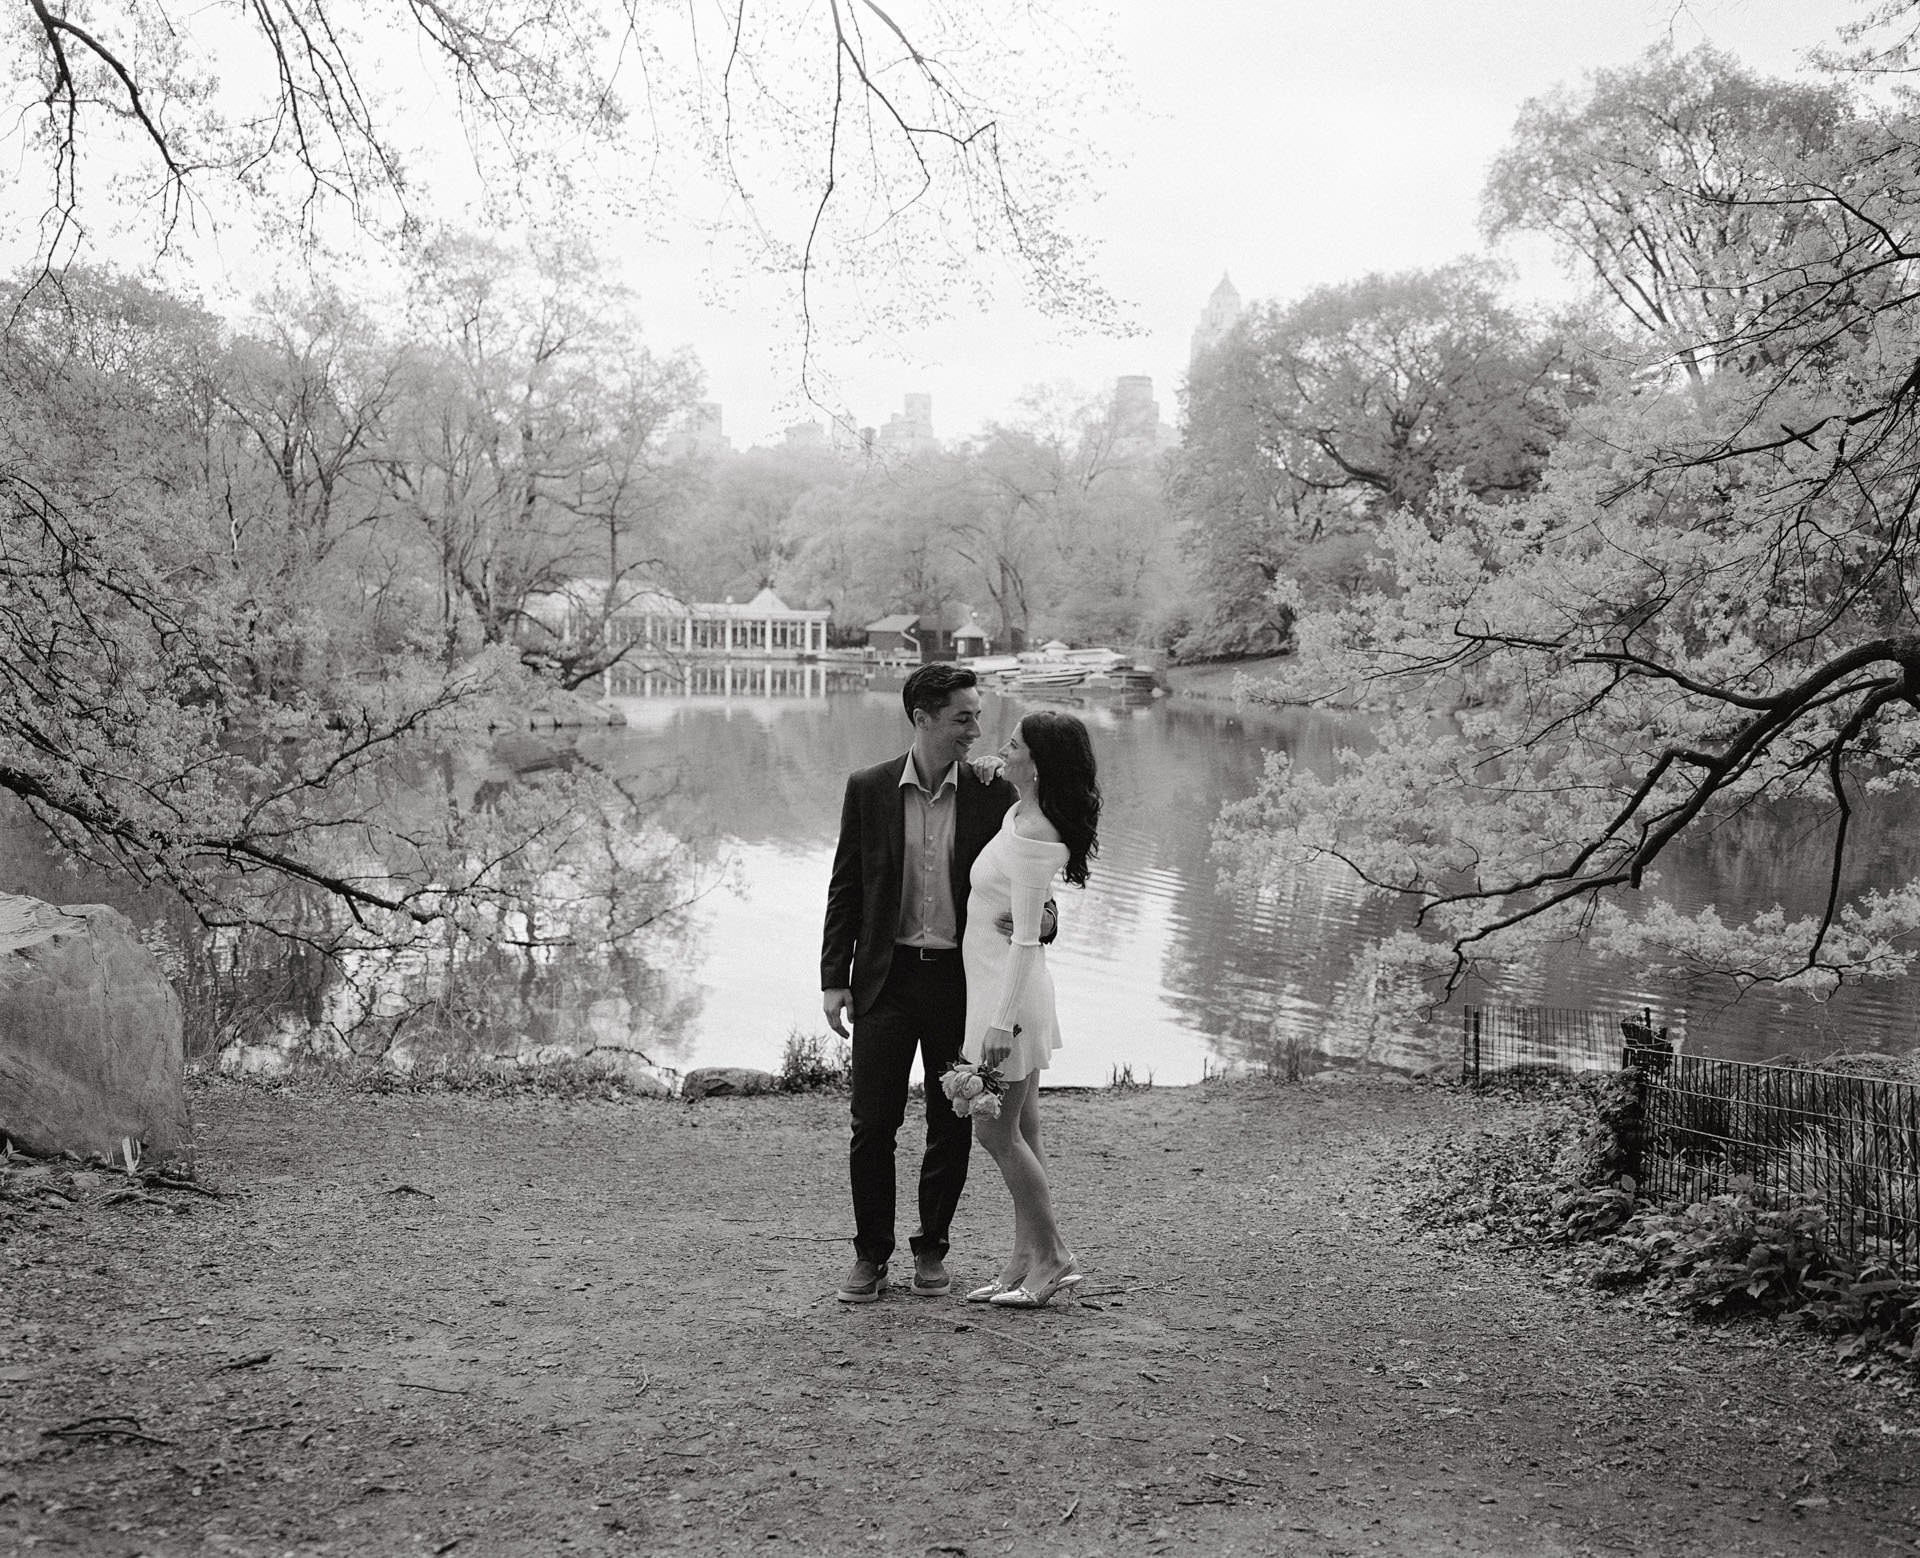 A couple enjoying a romantic walk next to the lake near the Central Park Boathouse, with the lush greenery reflected in the water.